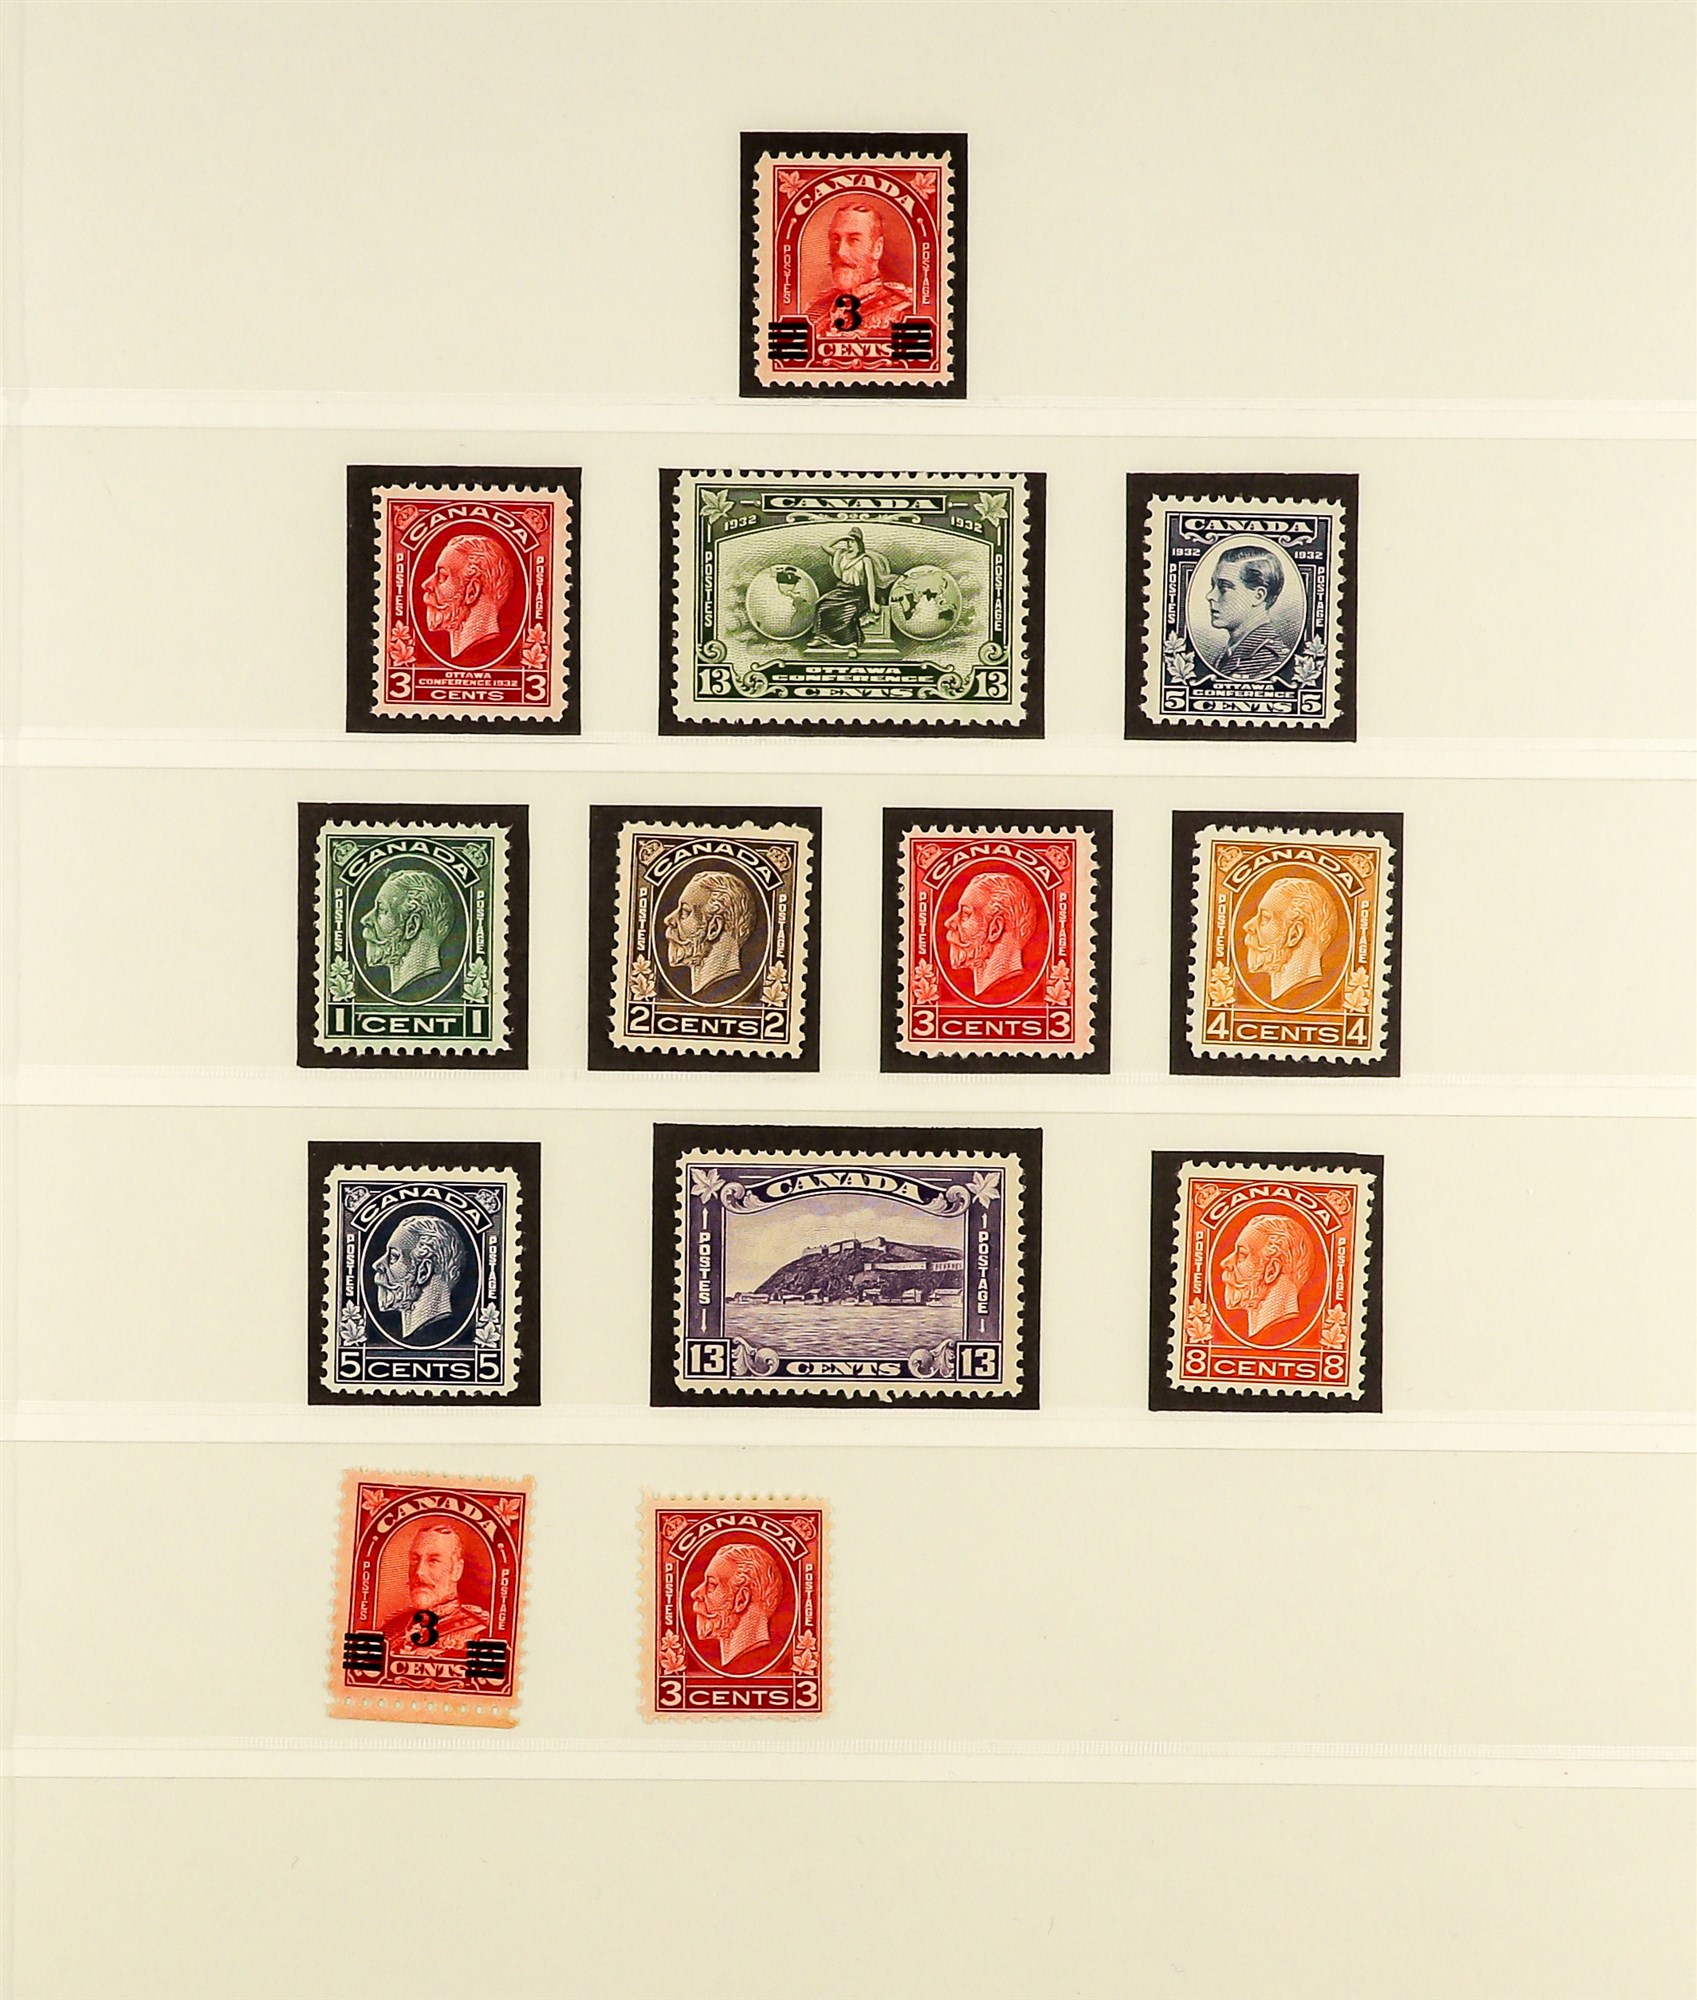 CANADA 1911 - 1936 MINT / NEVER HINGED MINT COLLECTION of around 150 stamps on hingeless pages, - Image 5 of 9